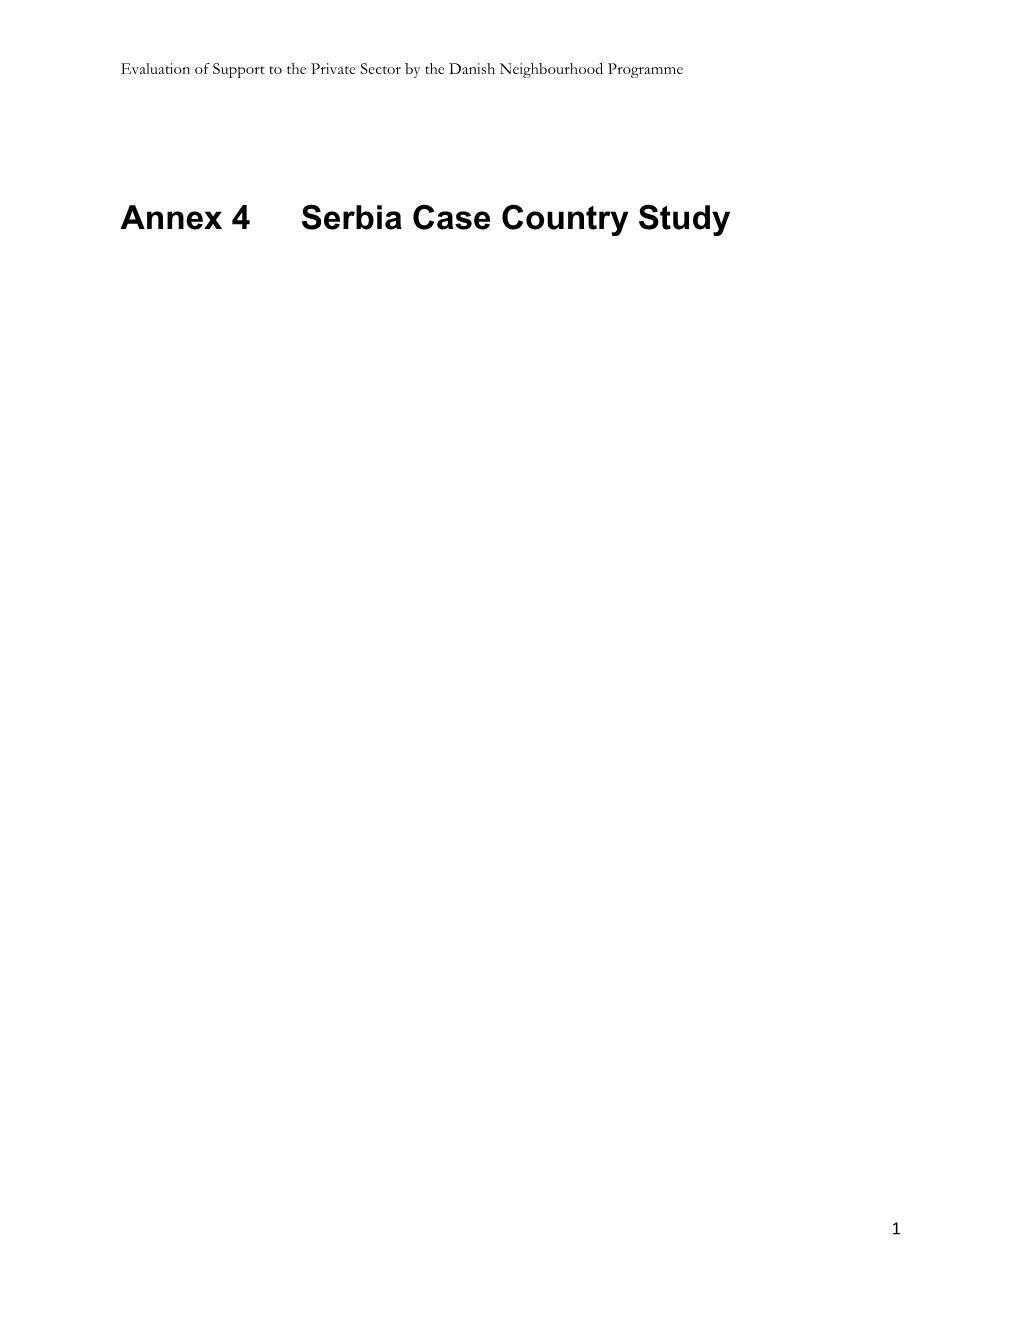 Annex 4 Serbia Case Country Study